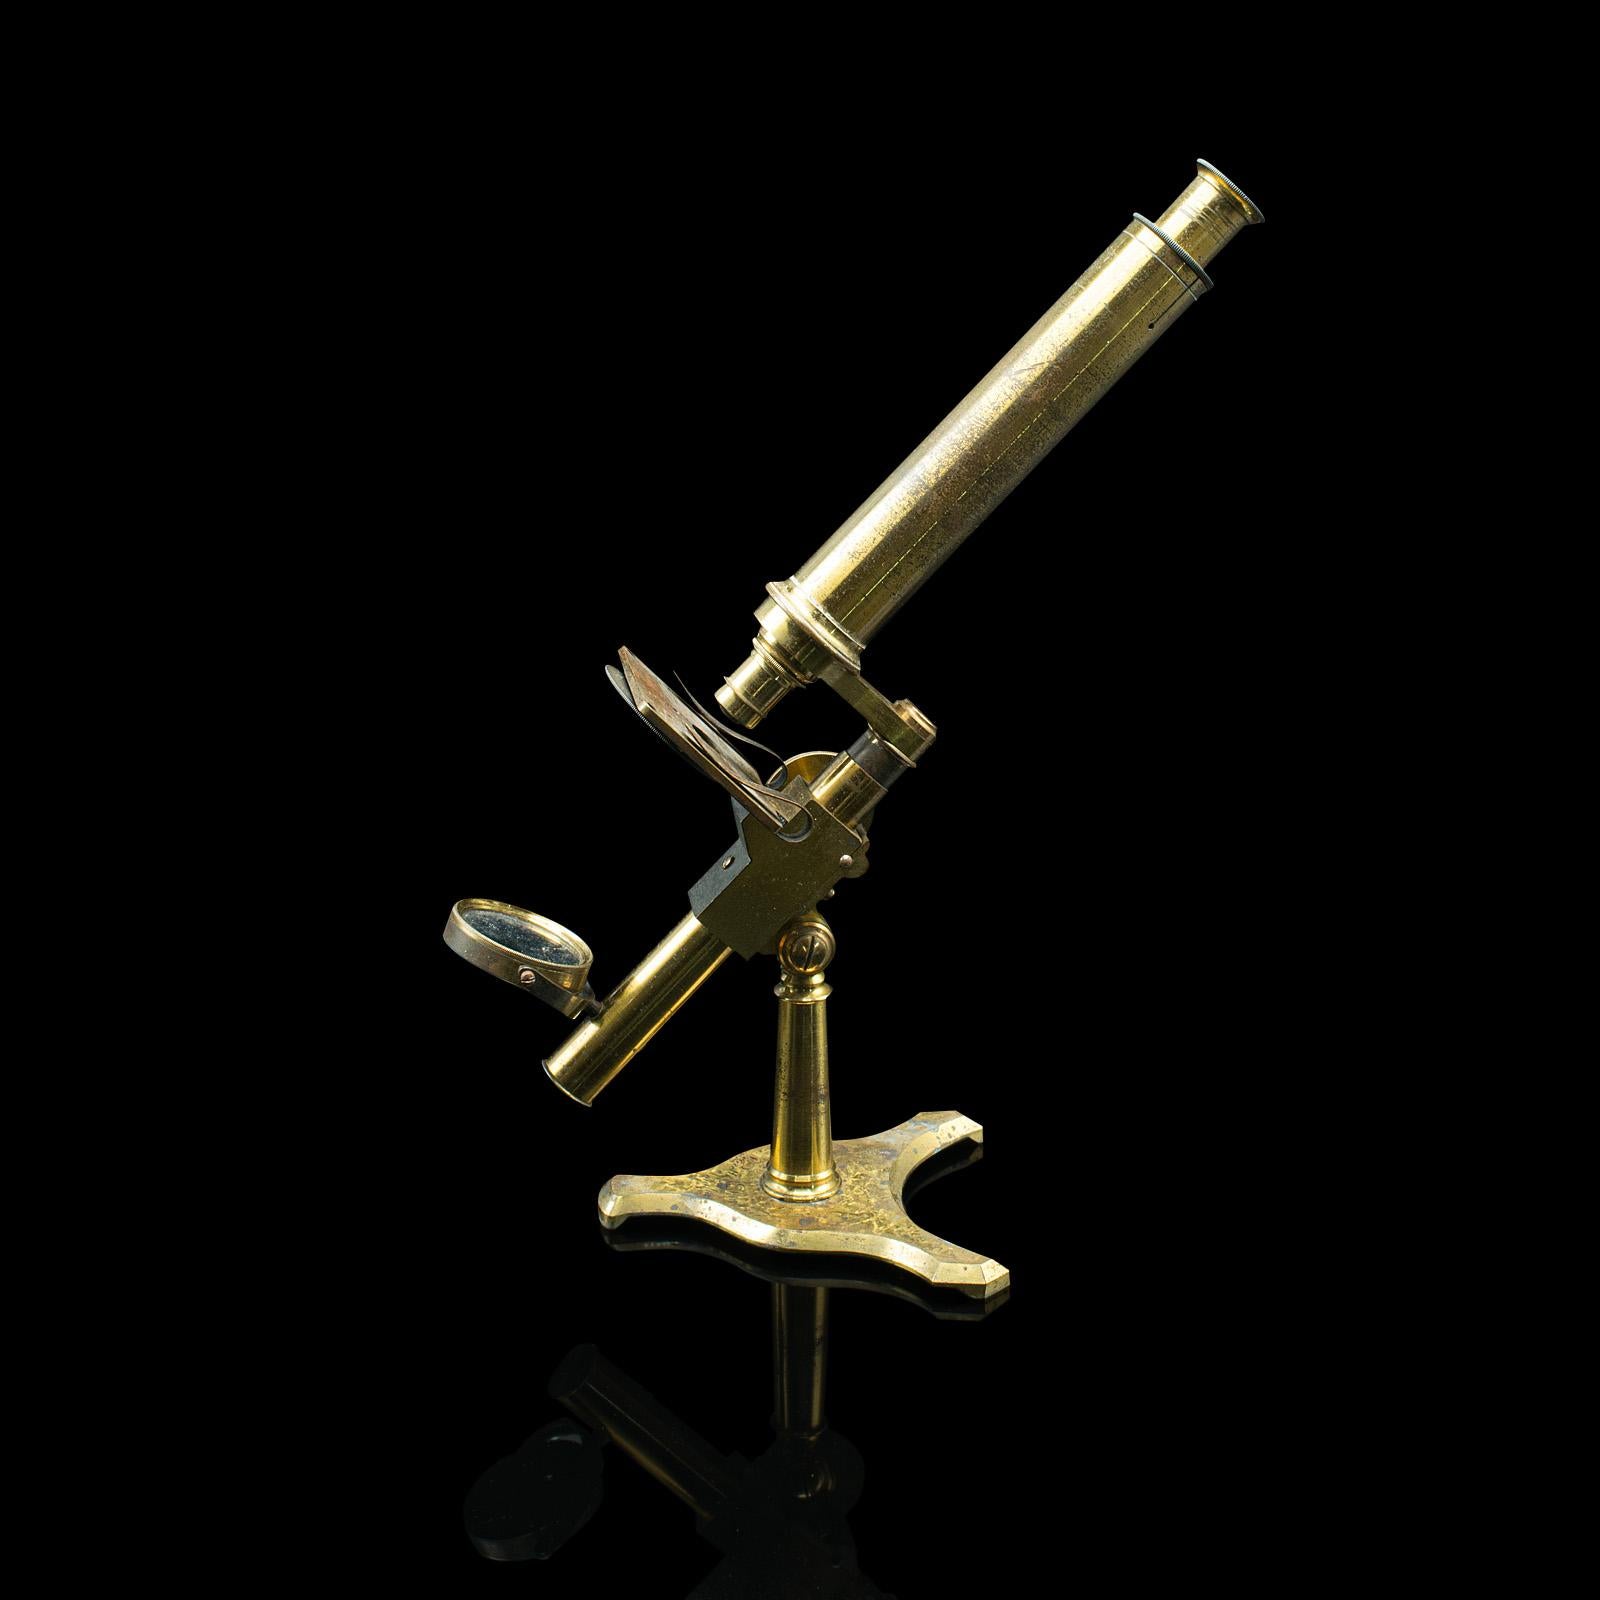 This is an antique compound microscope. An English, brass instrument within a mahogany case by Negretti & Zambra, dating to the Victorian period, circa 1870.

Delightful portable microscope with a quality case and modular build
Displays a